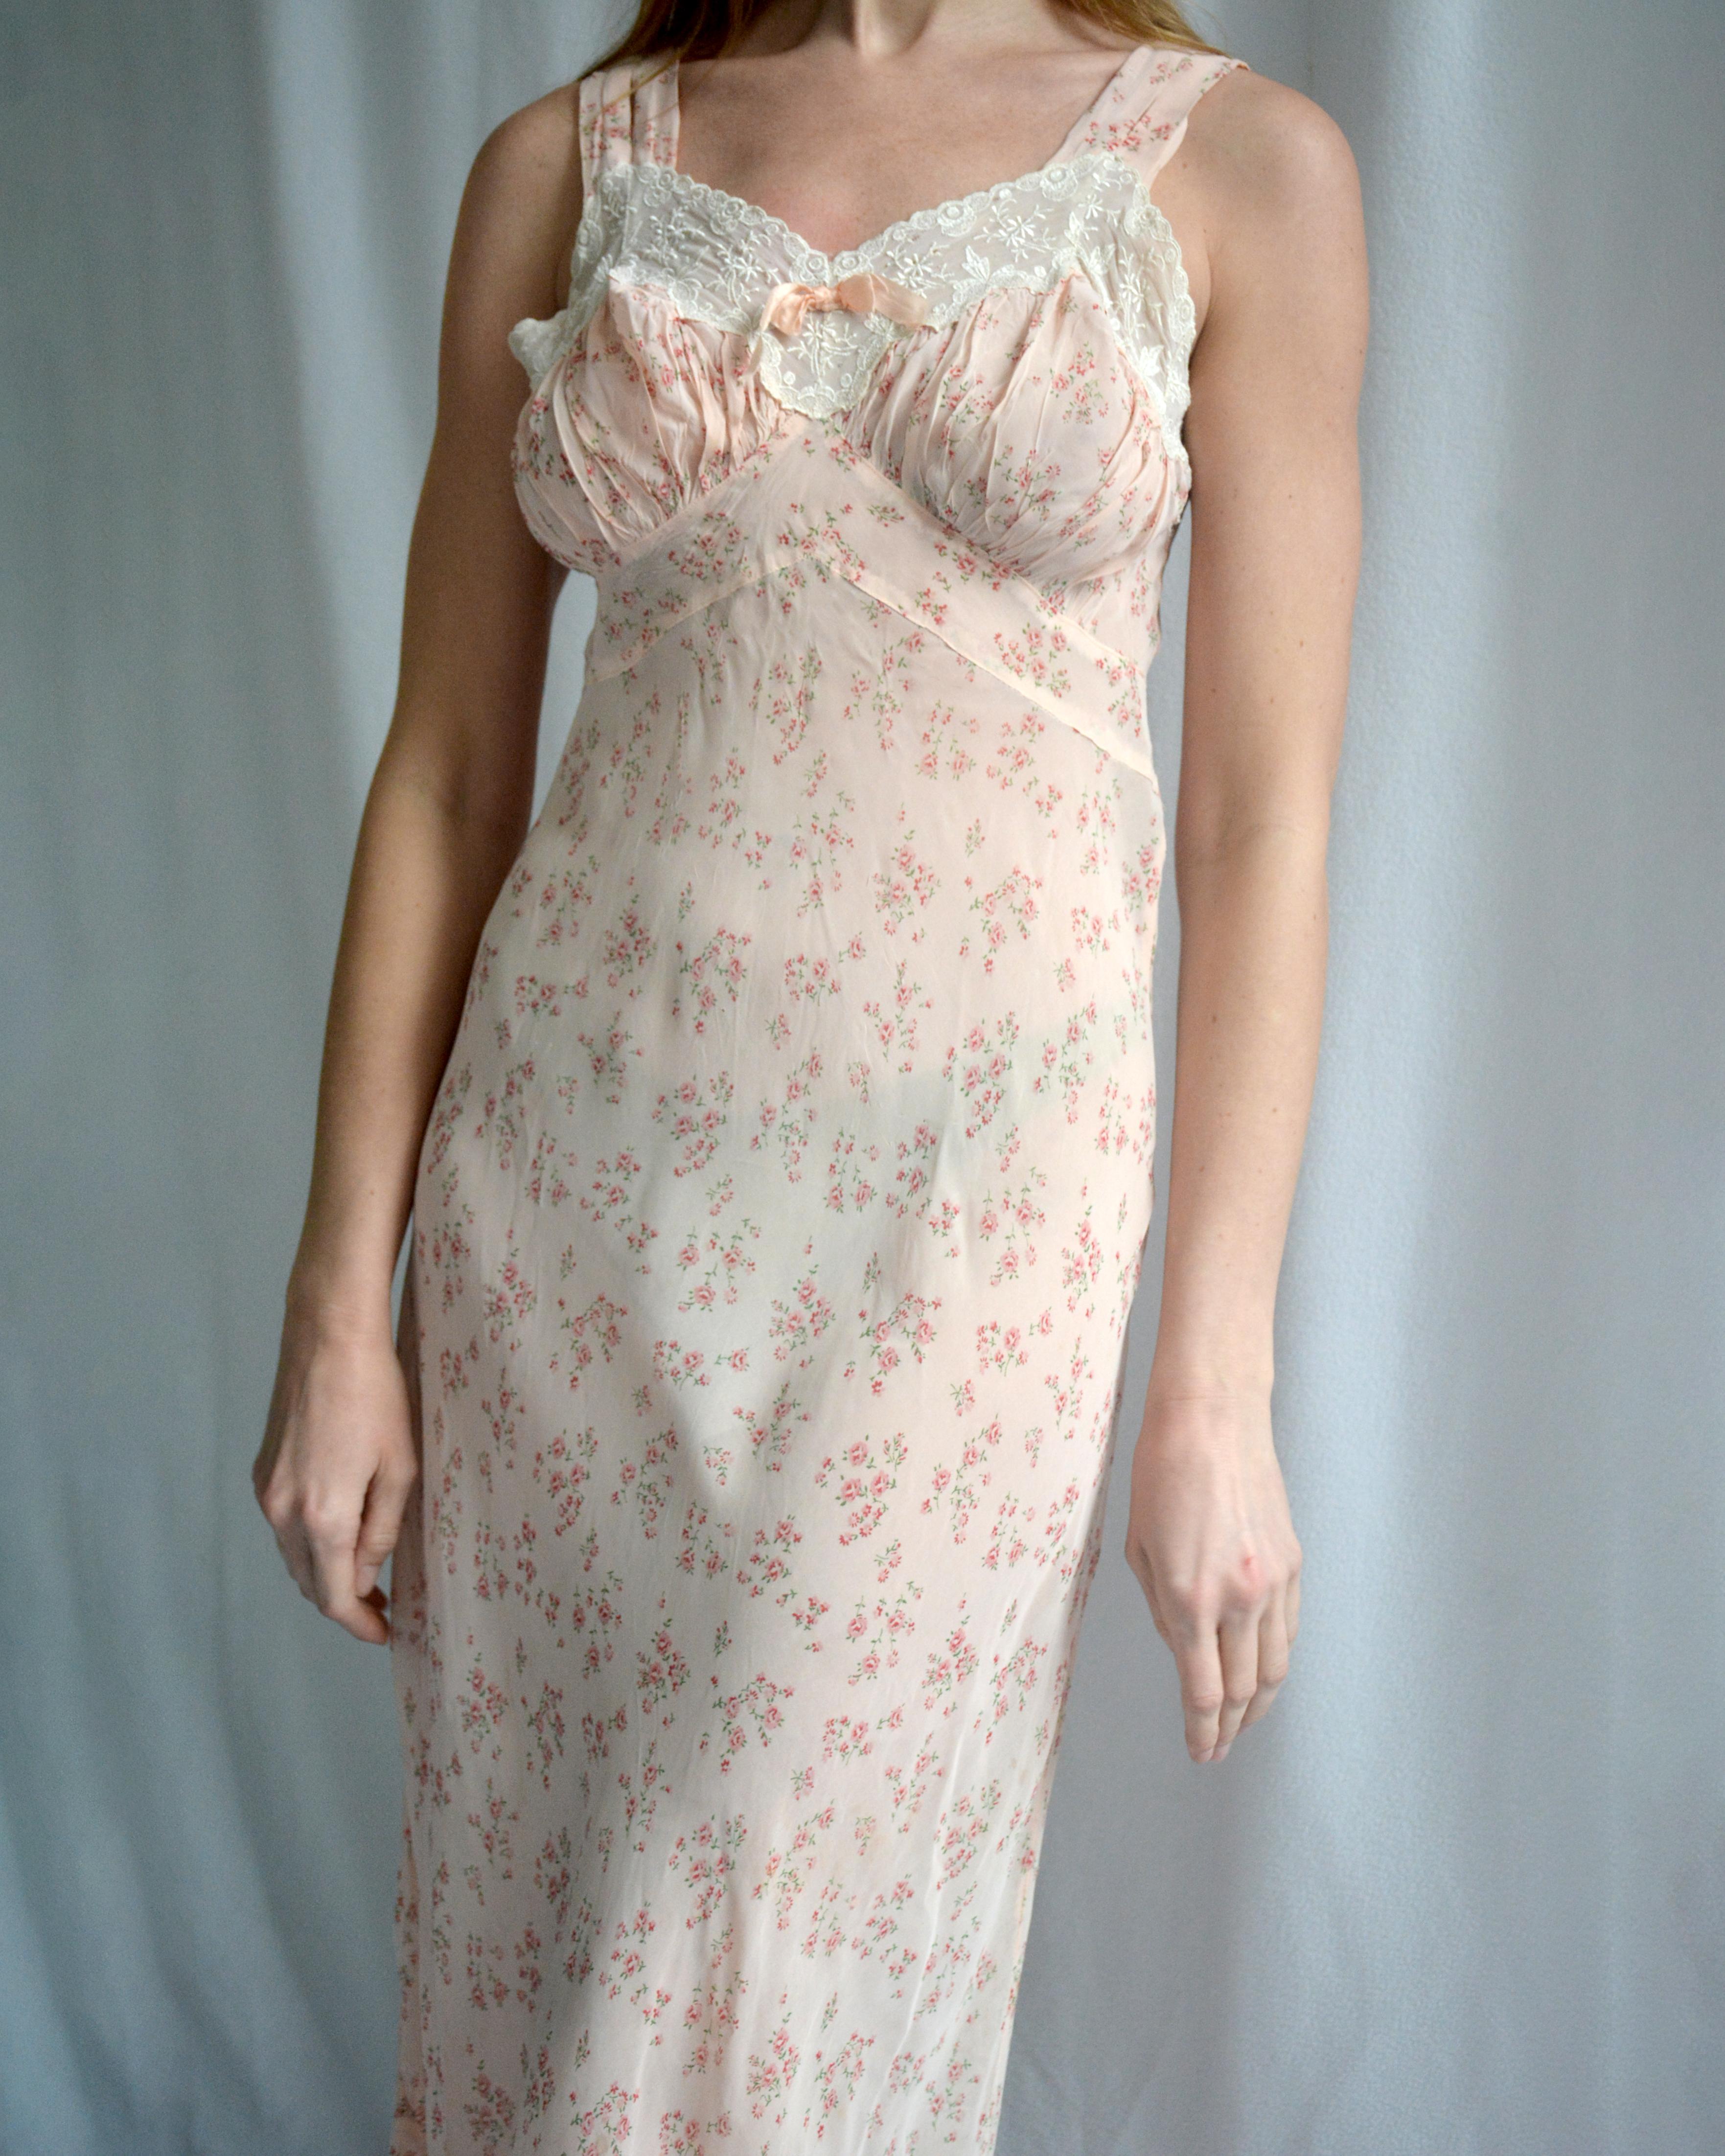 VINTAGE 1930s FLORAL SLIP DRESS In Good Condition For Sale In New York, NY